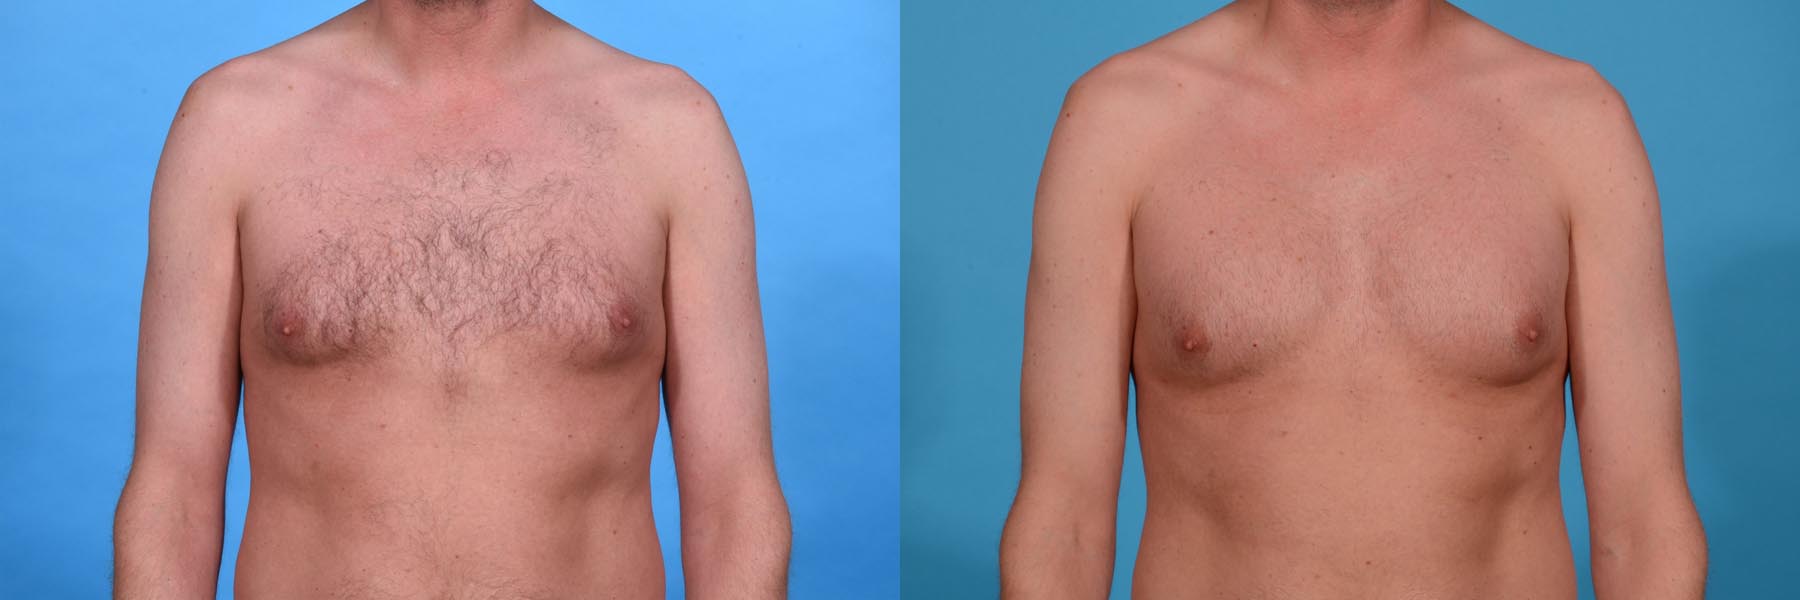 Pectoral Augmentation Before and After Photo by Sculpt Aesthetic Center in Frisco, TX